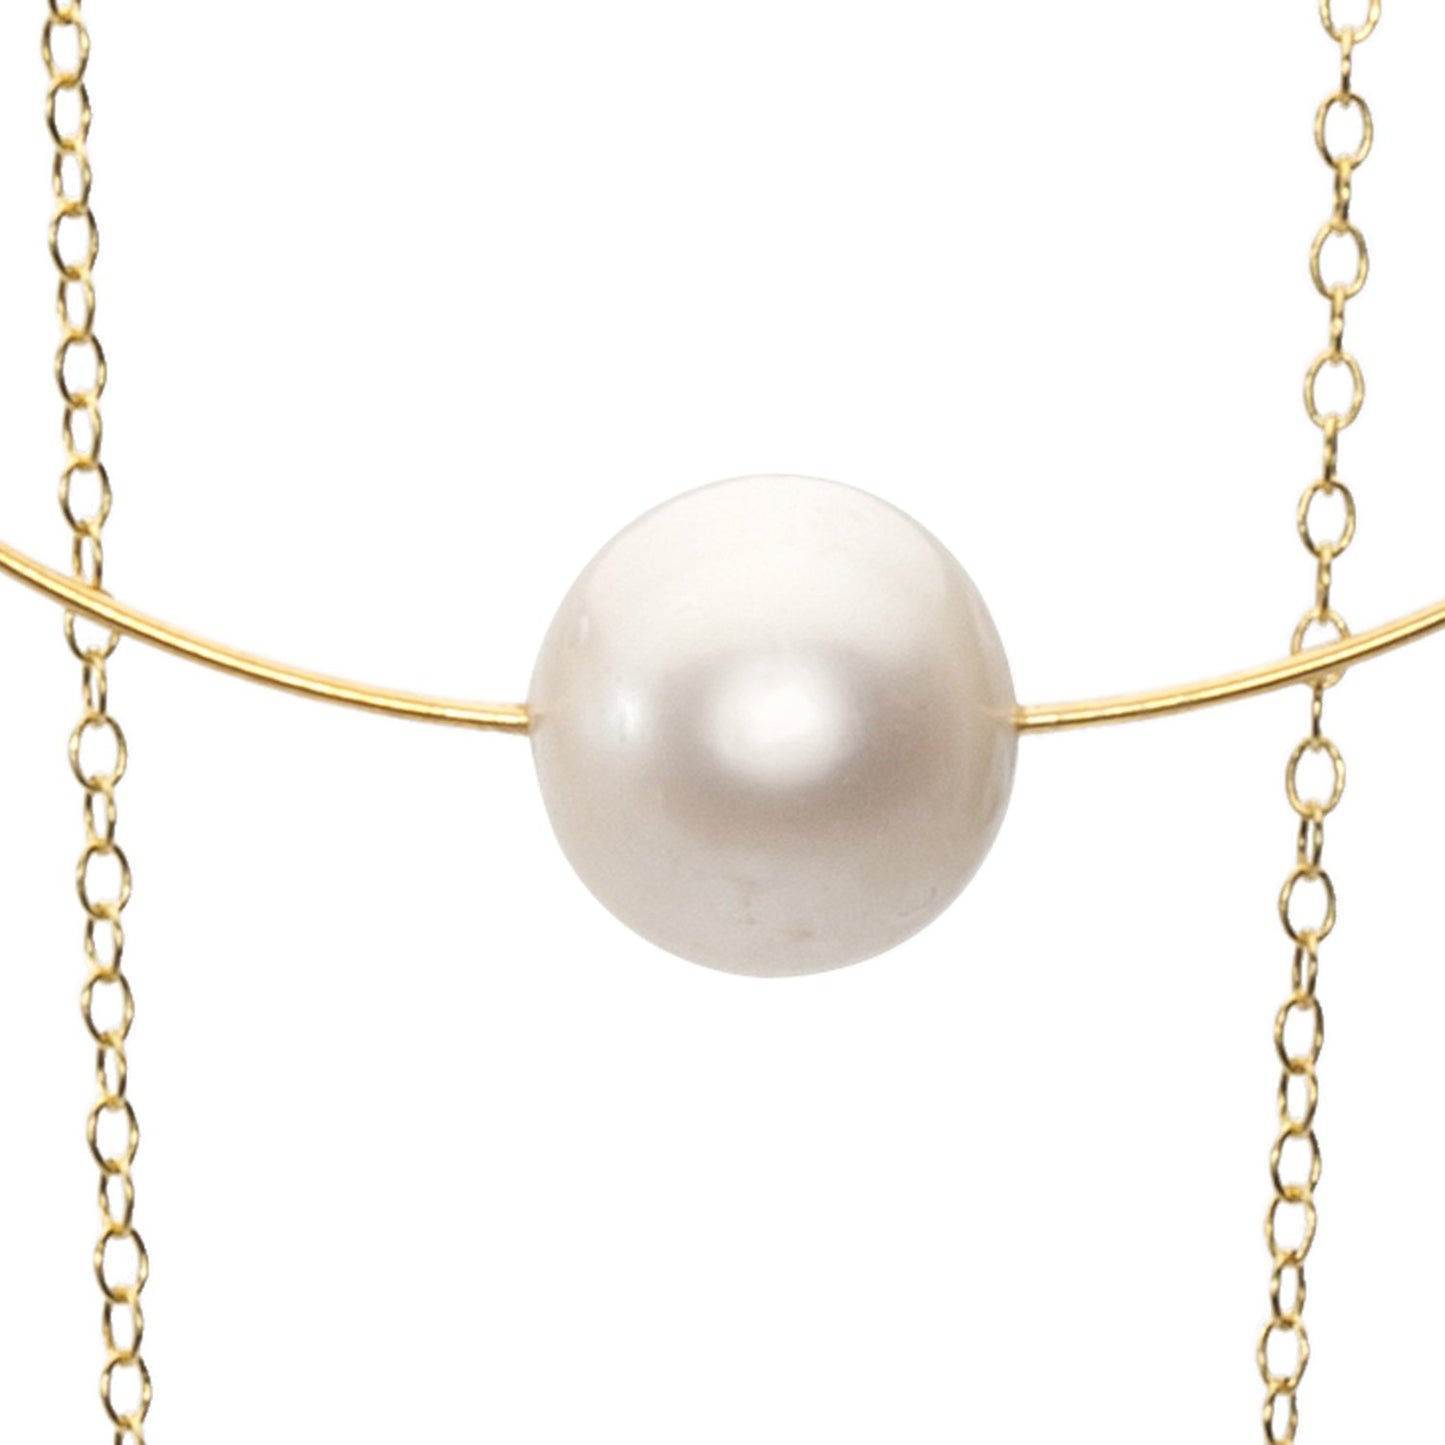 Statement Circle Pendant with Round Freshwater Pearl